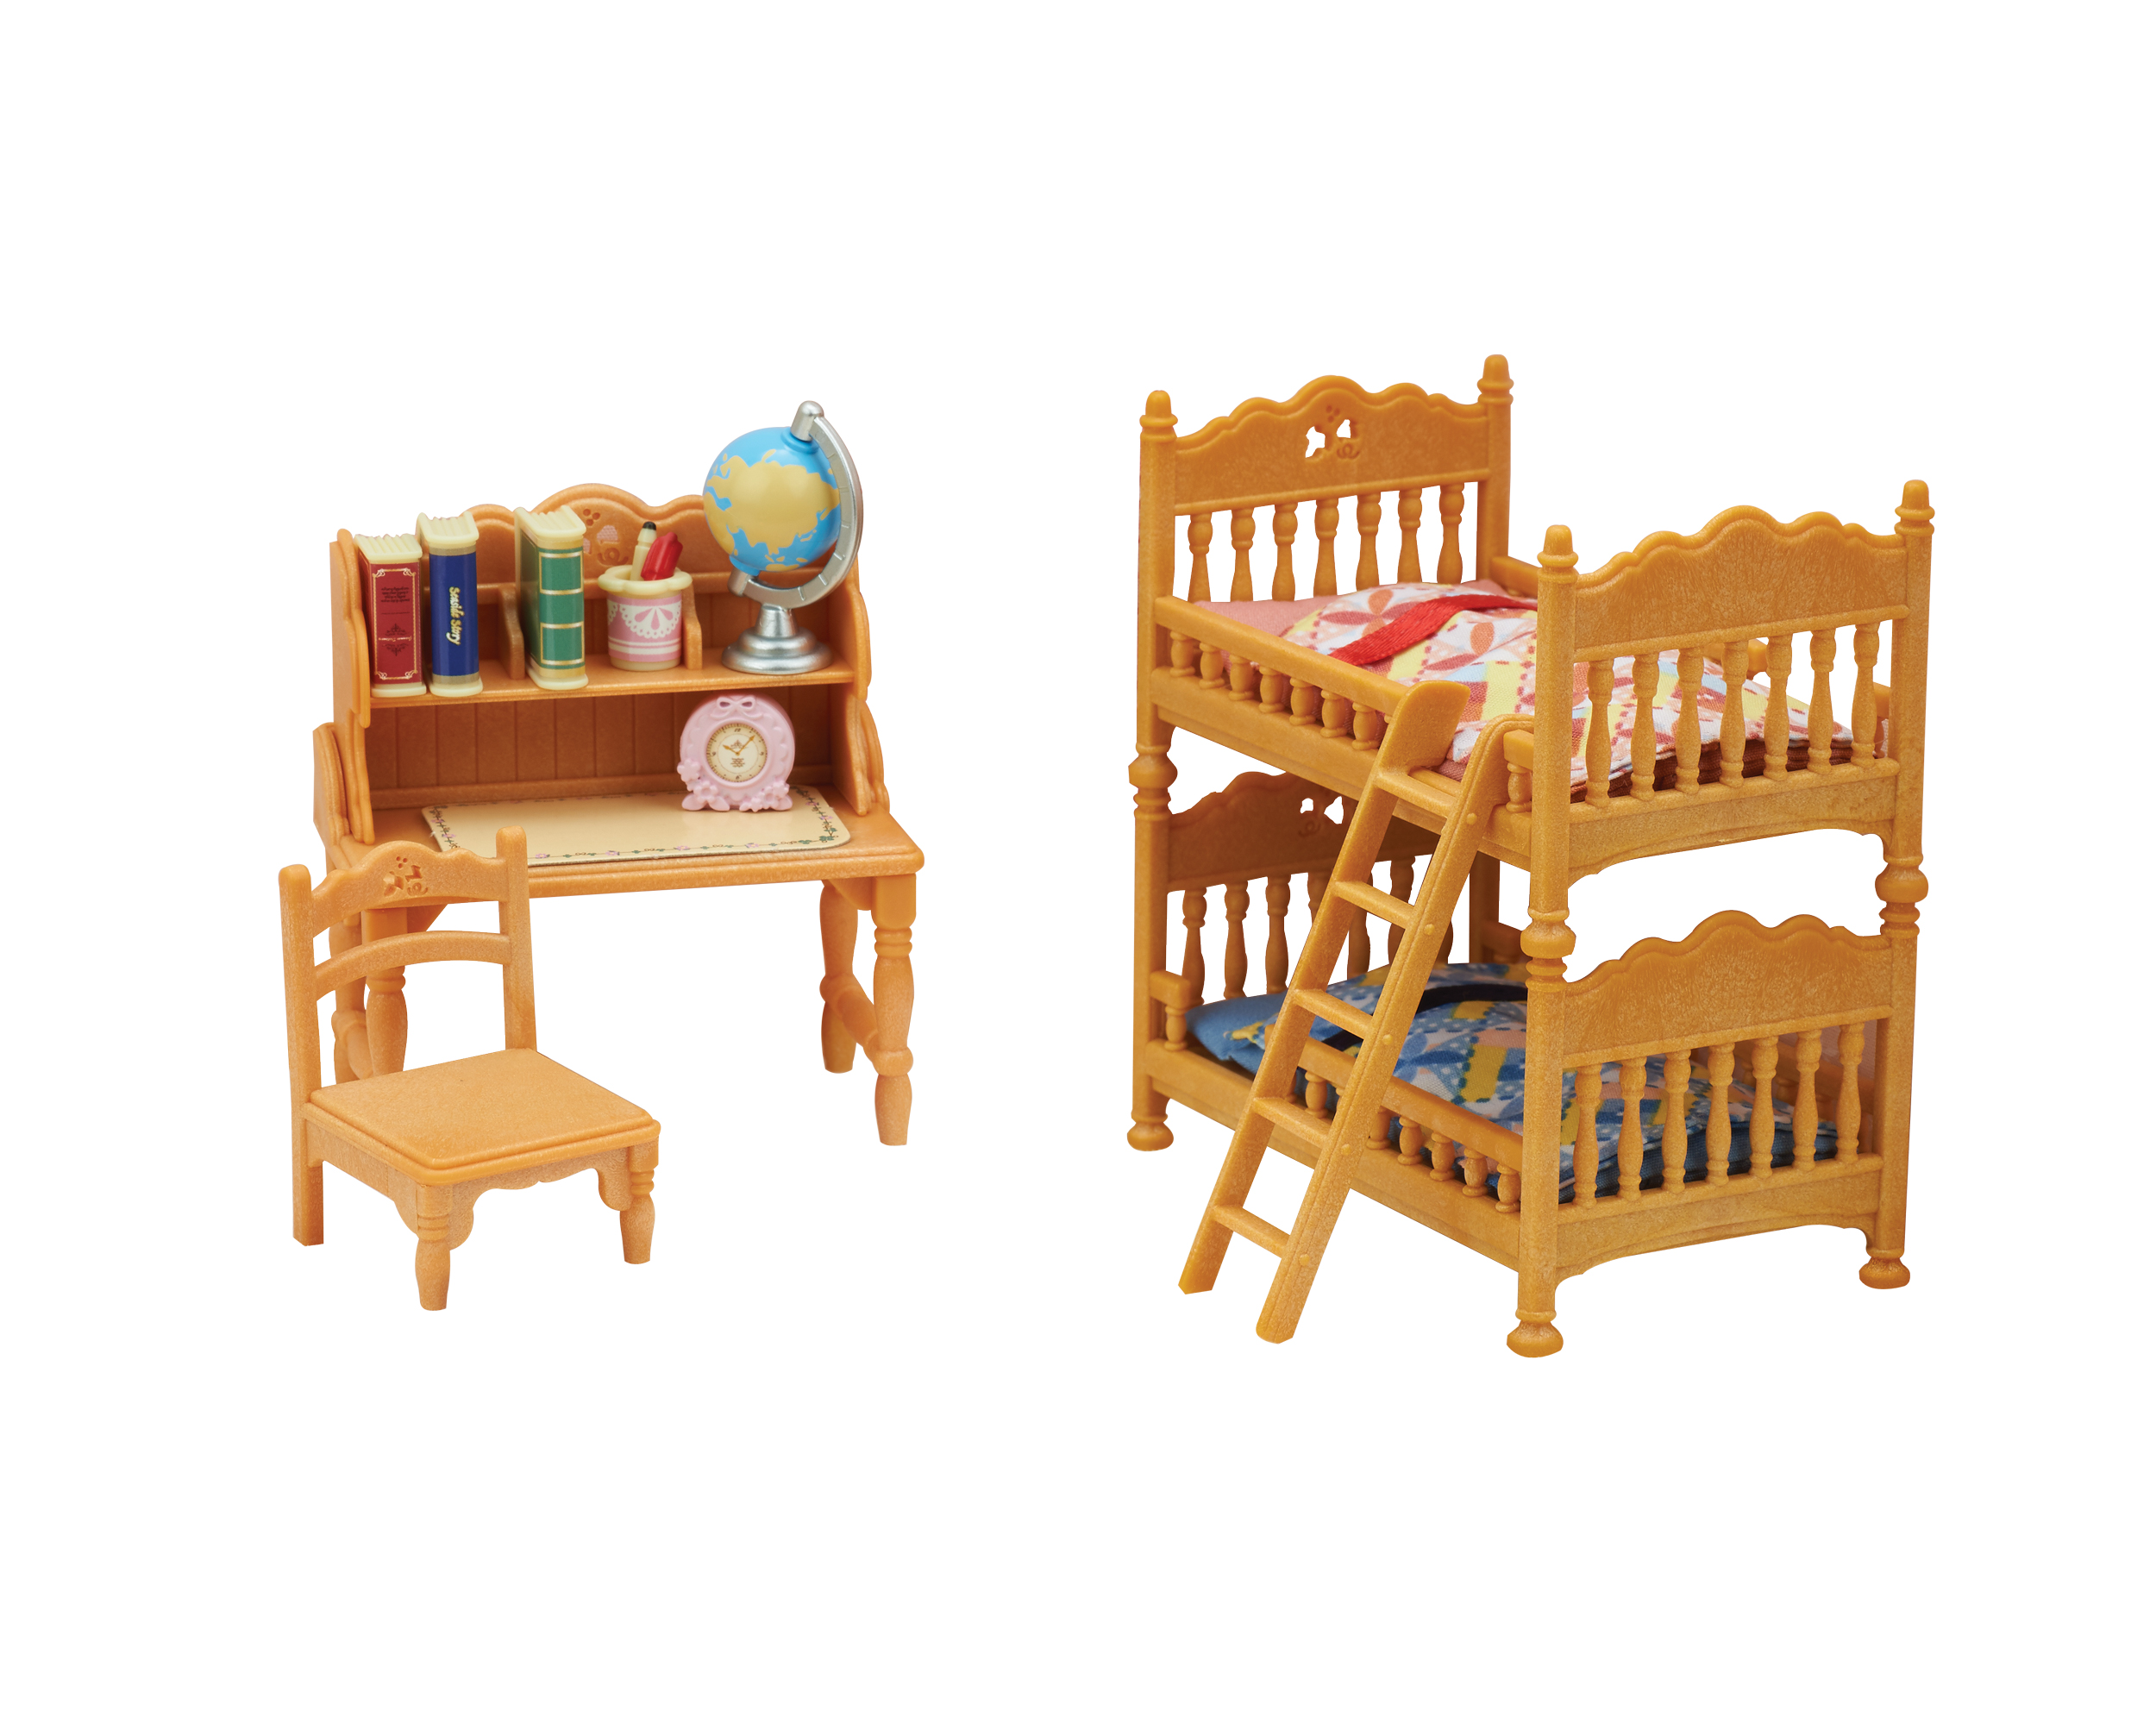 Calico Critters Children's Bedroom Set and Furniture Accessories  $11.88 $11.88